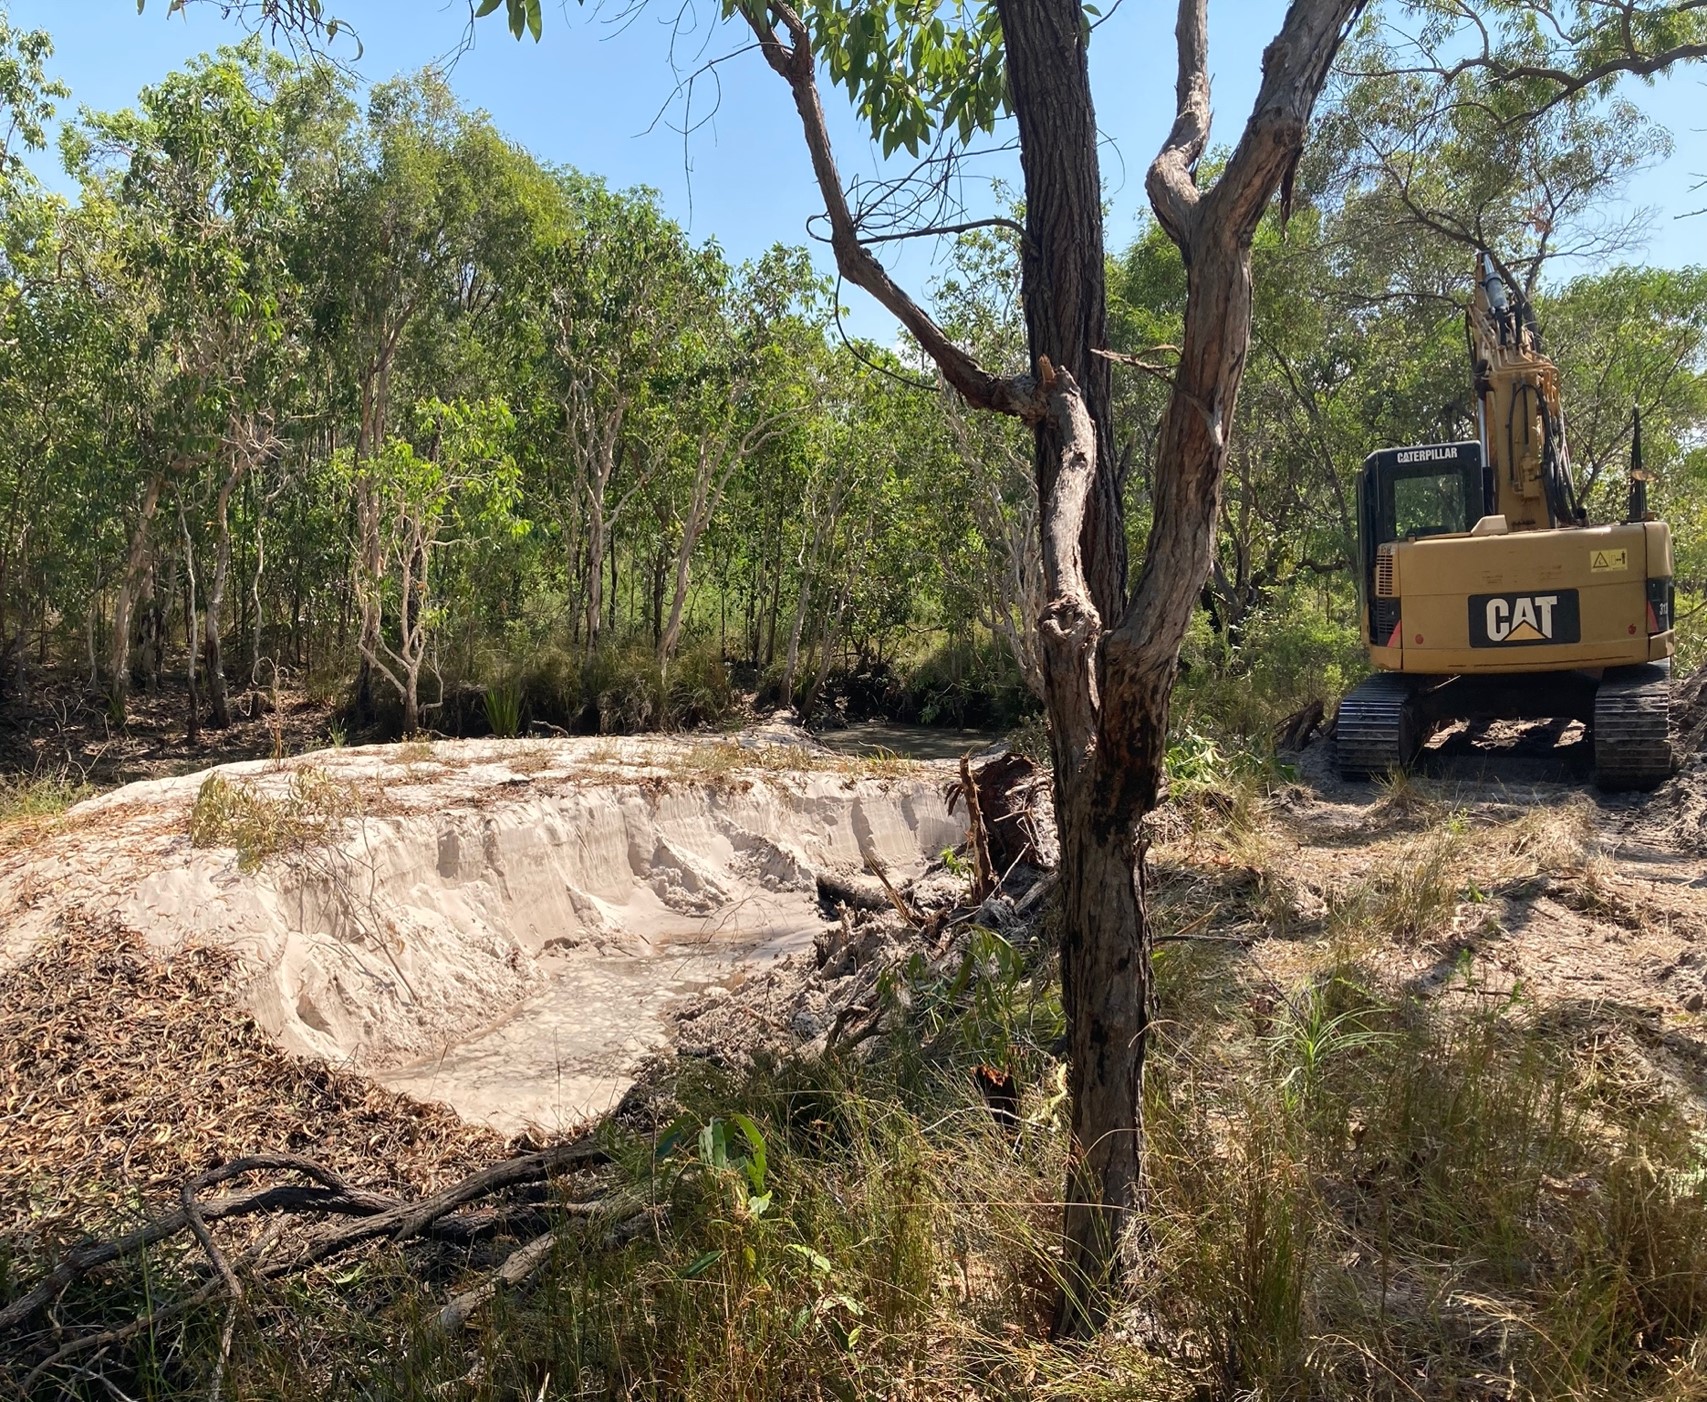 Bank of sandy sediment piled up in a lagoon with excavator in background.